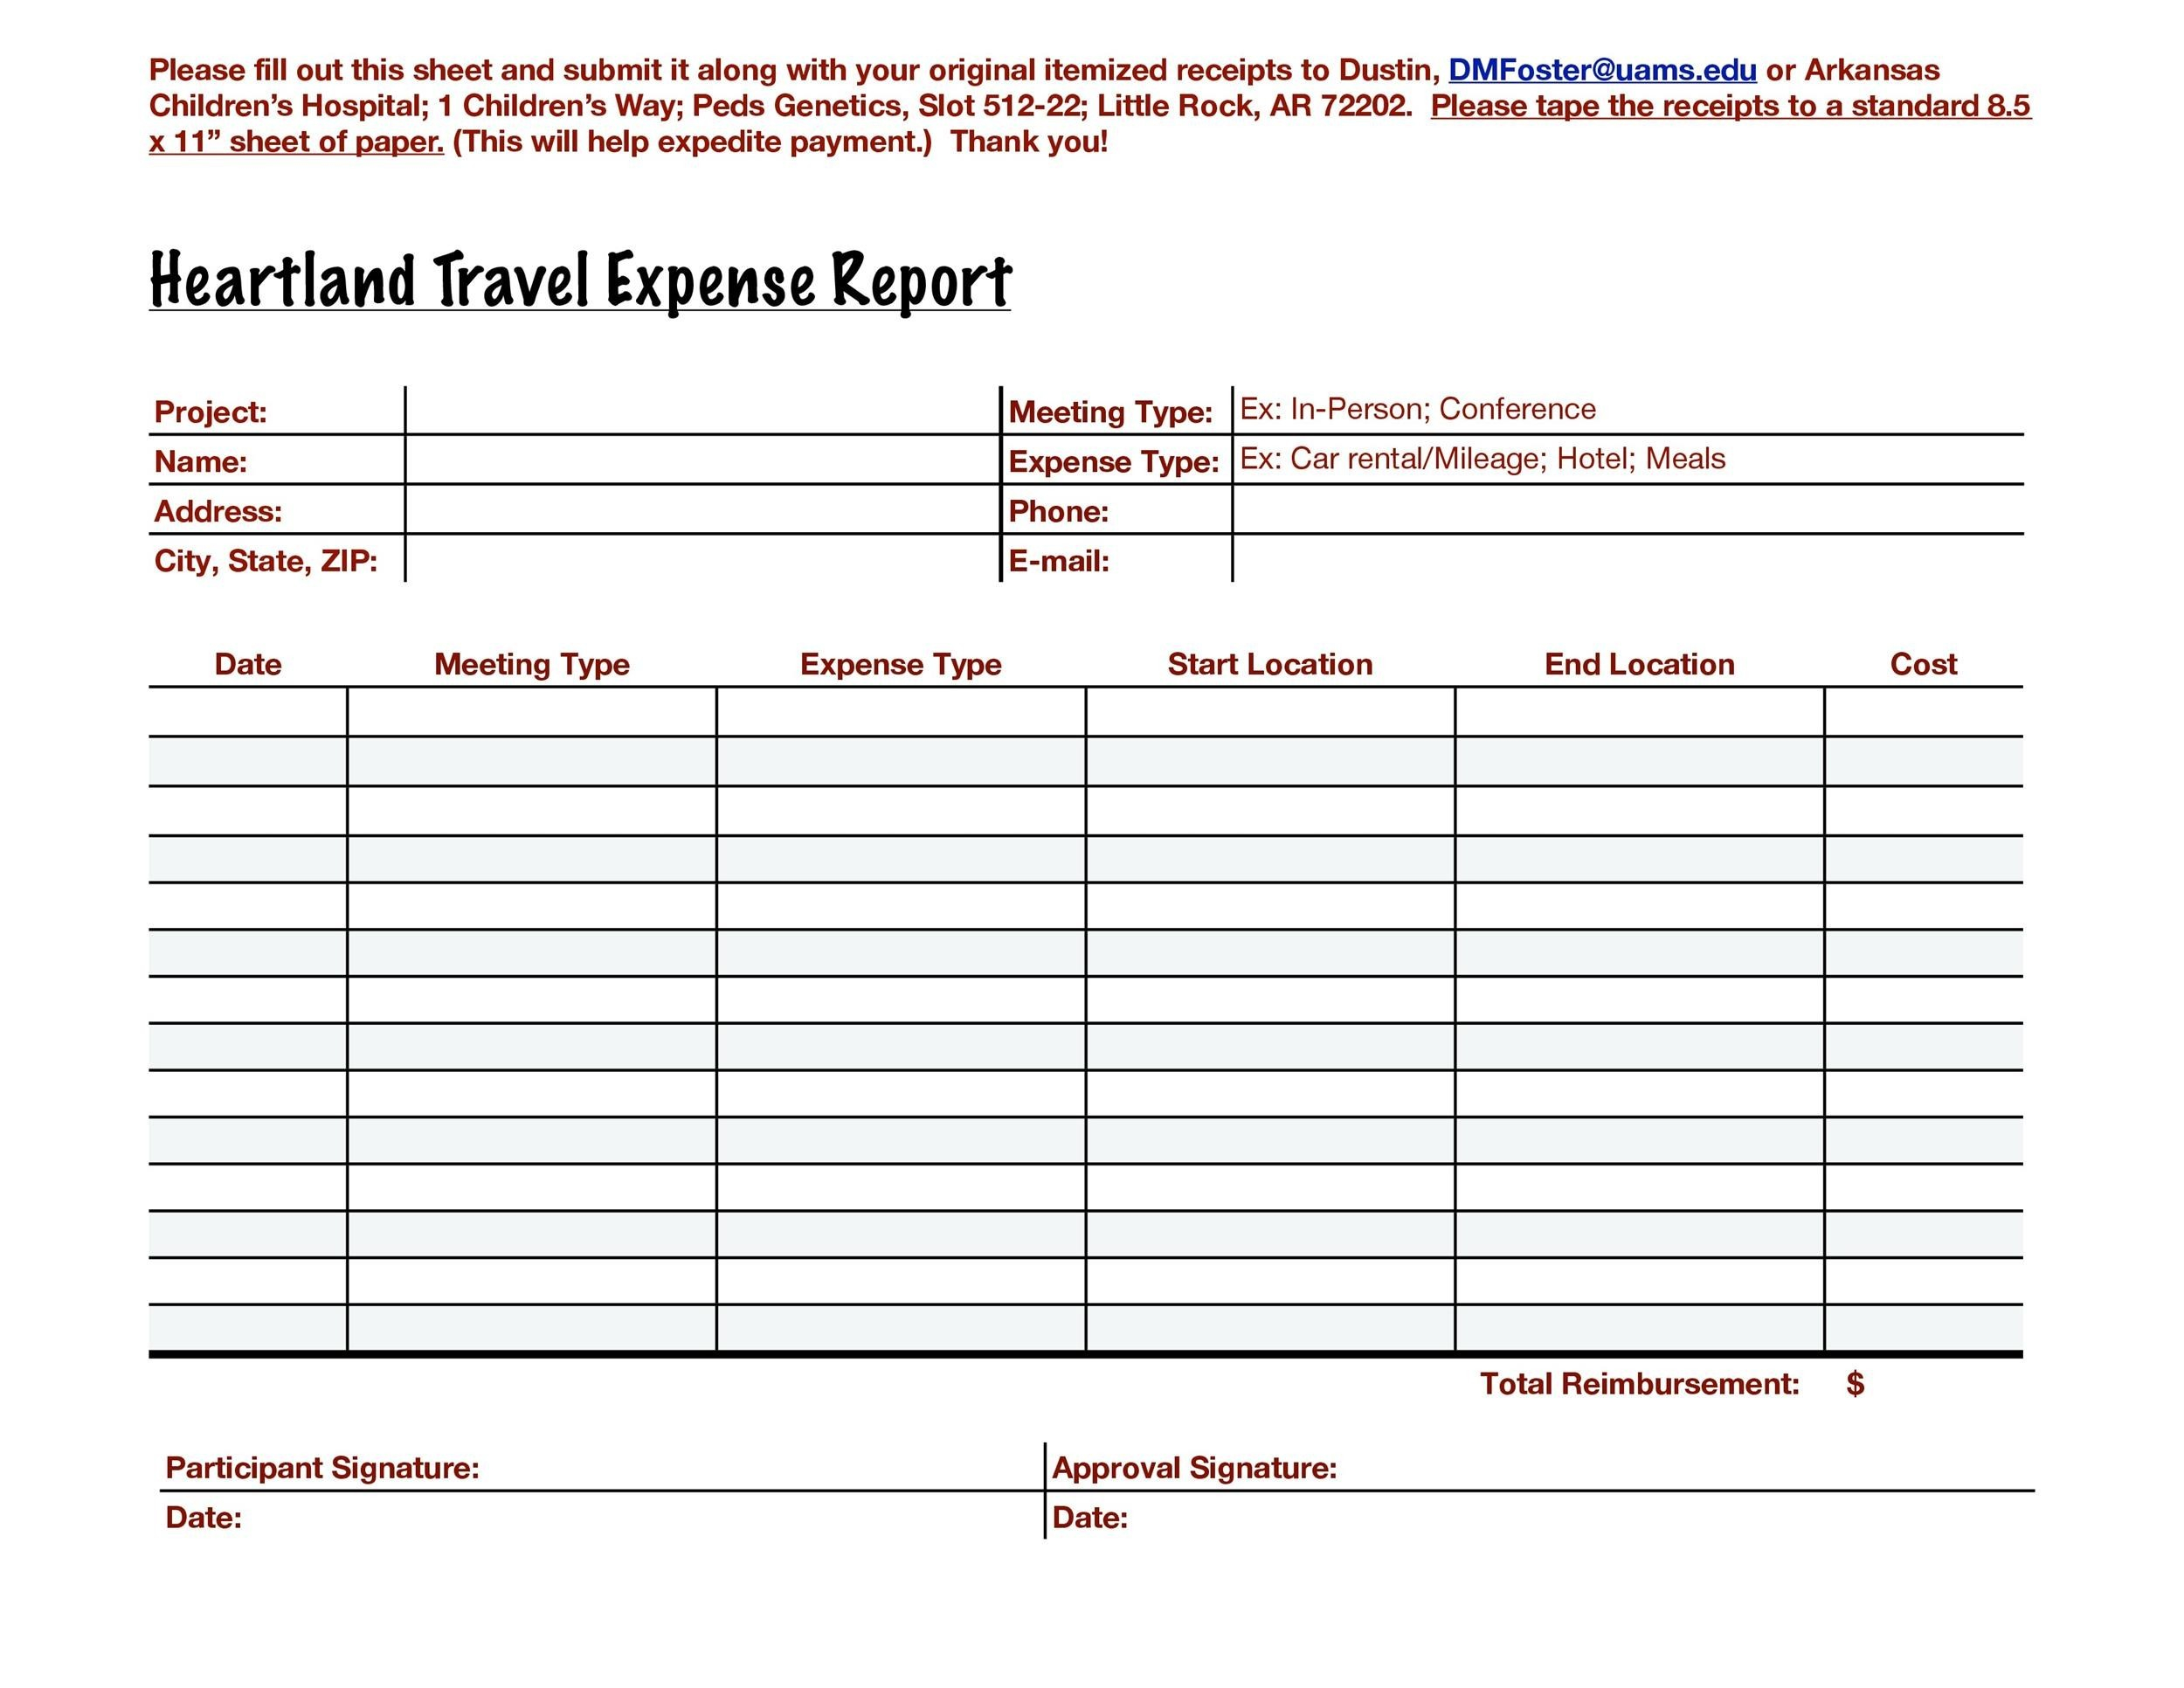 40 Expense Report Templates To Help You Save Money TemplateLab